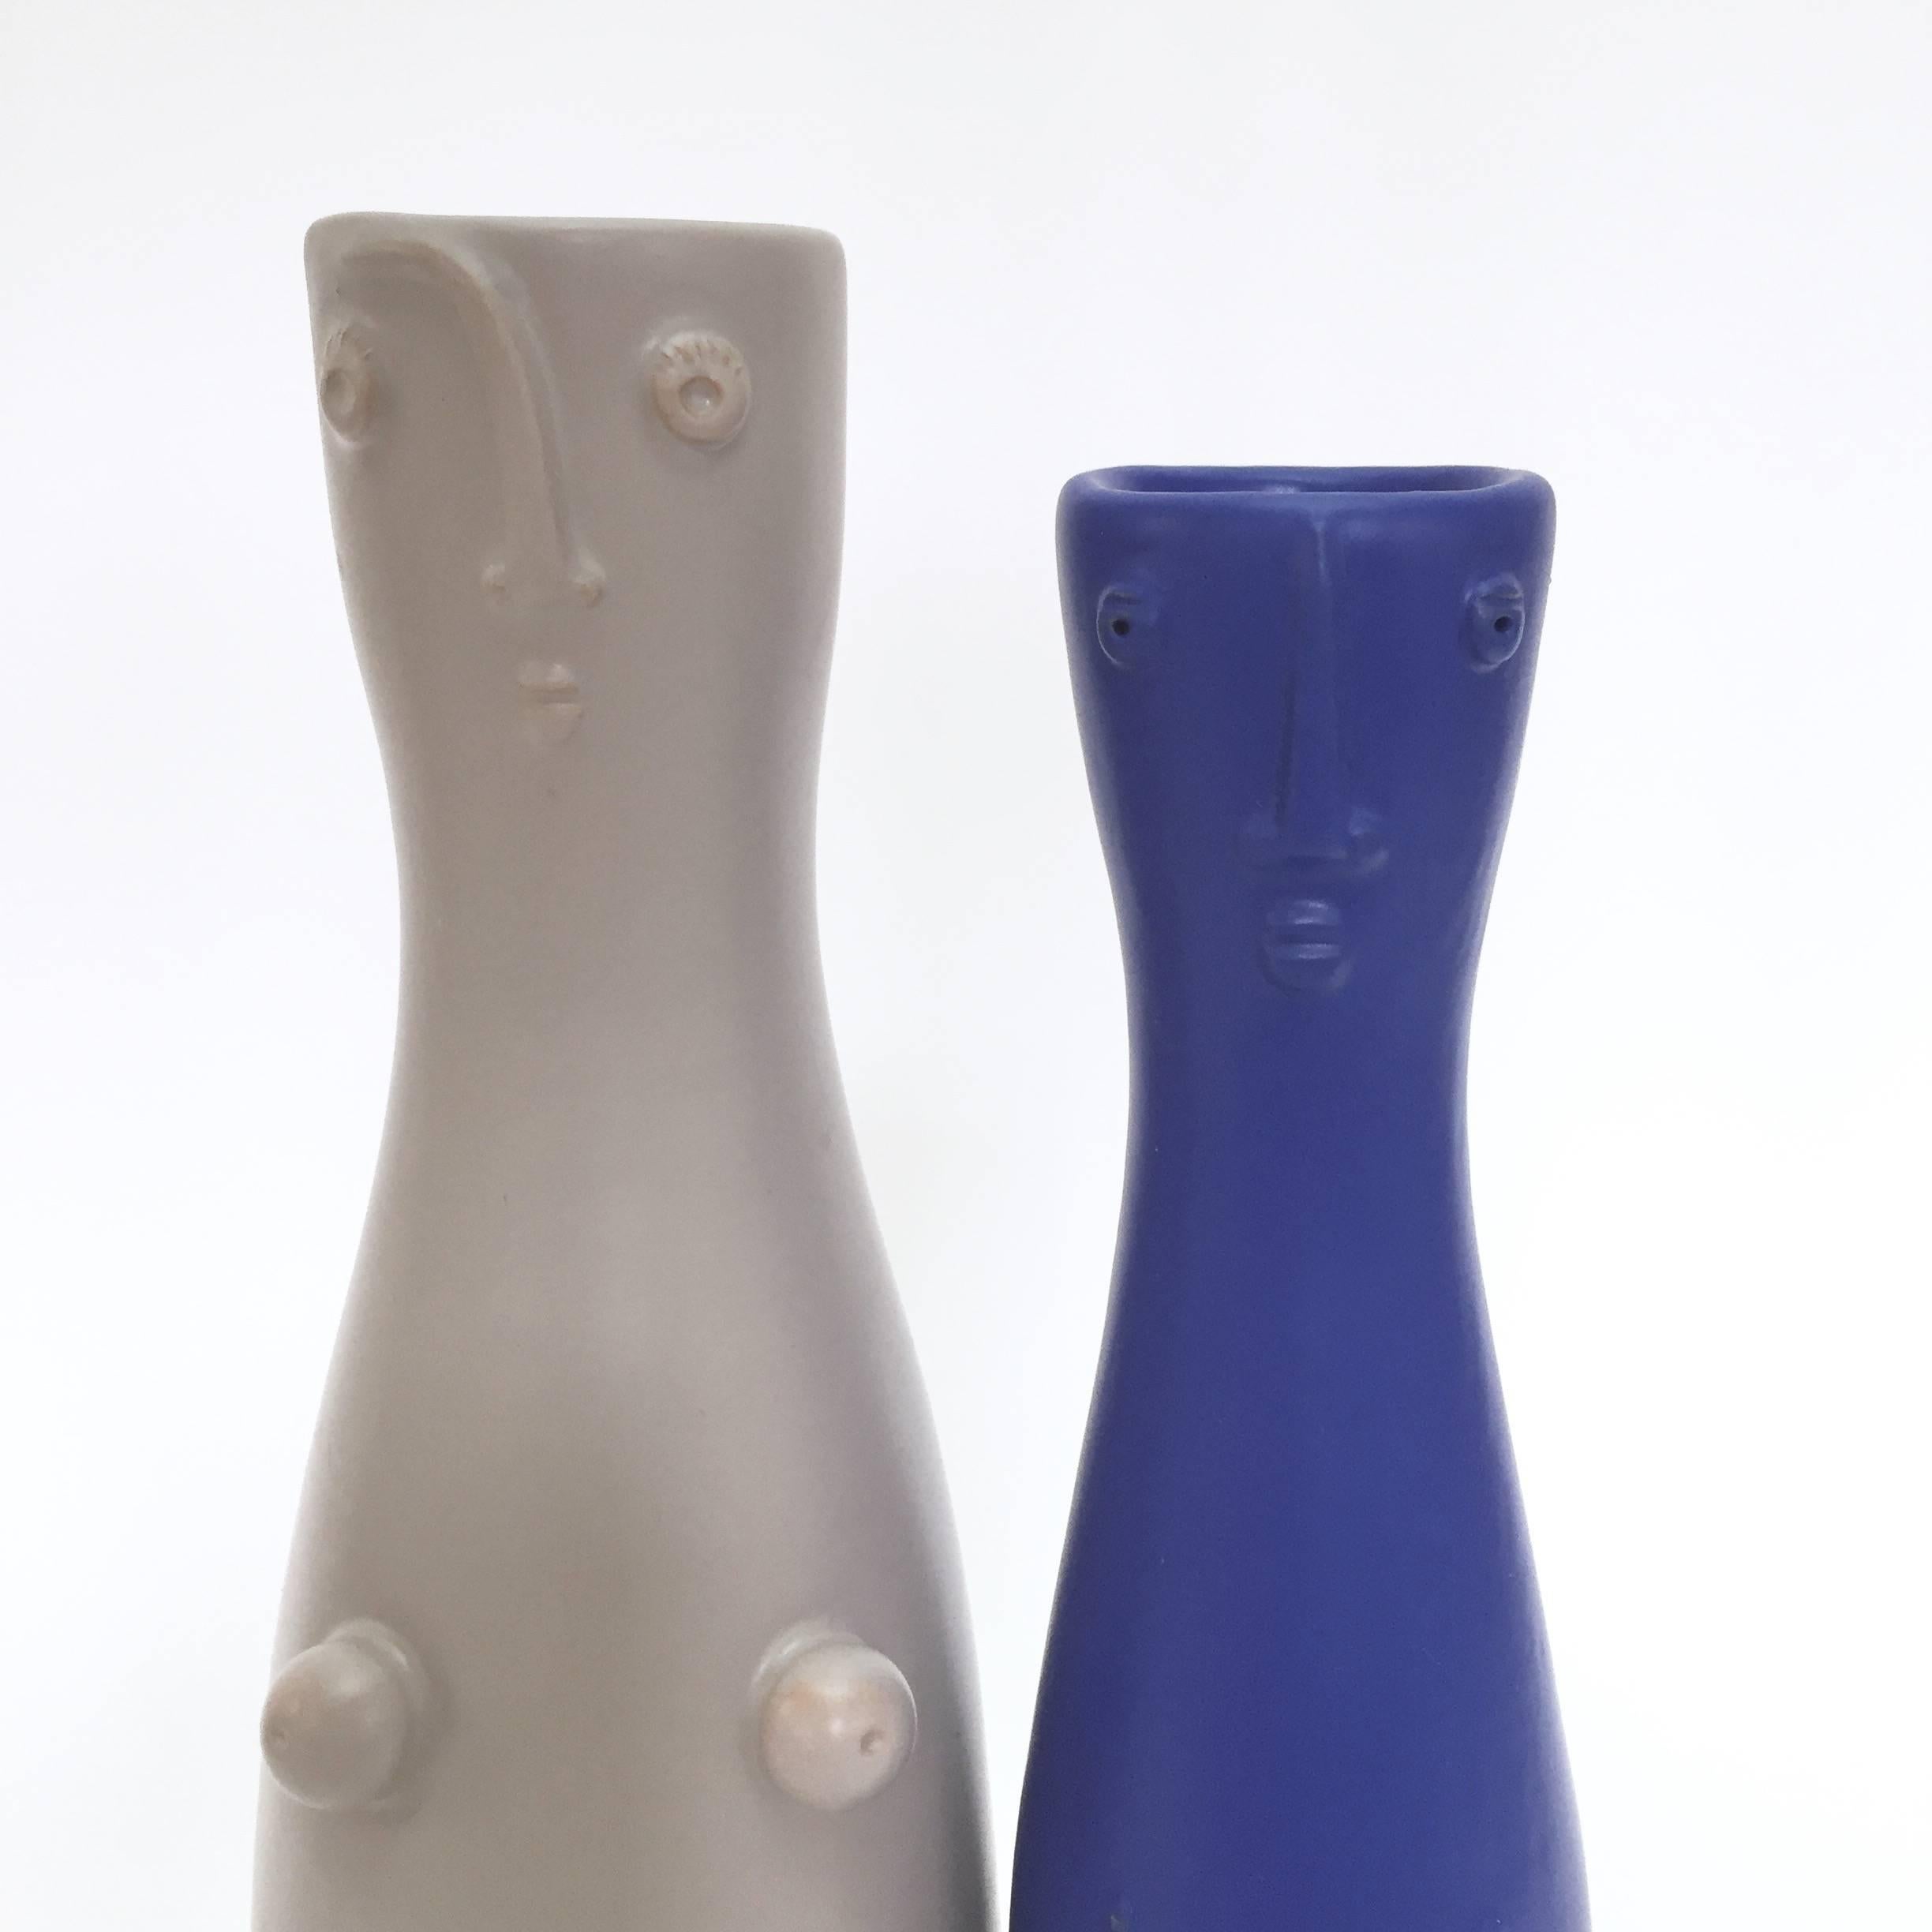 Pair of bottle-vases, organic and figurative shaped, ceramic glazed in pale grey and klein blue, decorated with stylized and naked male and female characters in front.

One of kind handmade pieces, signed by the French ceramicists, the